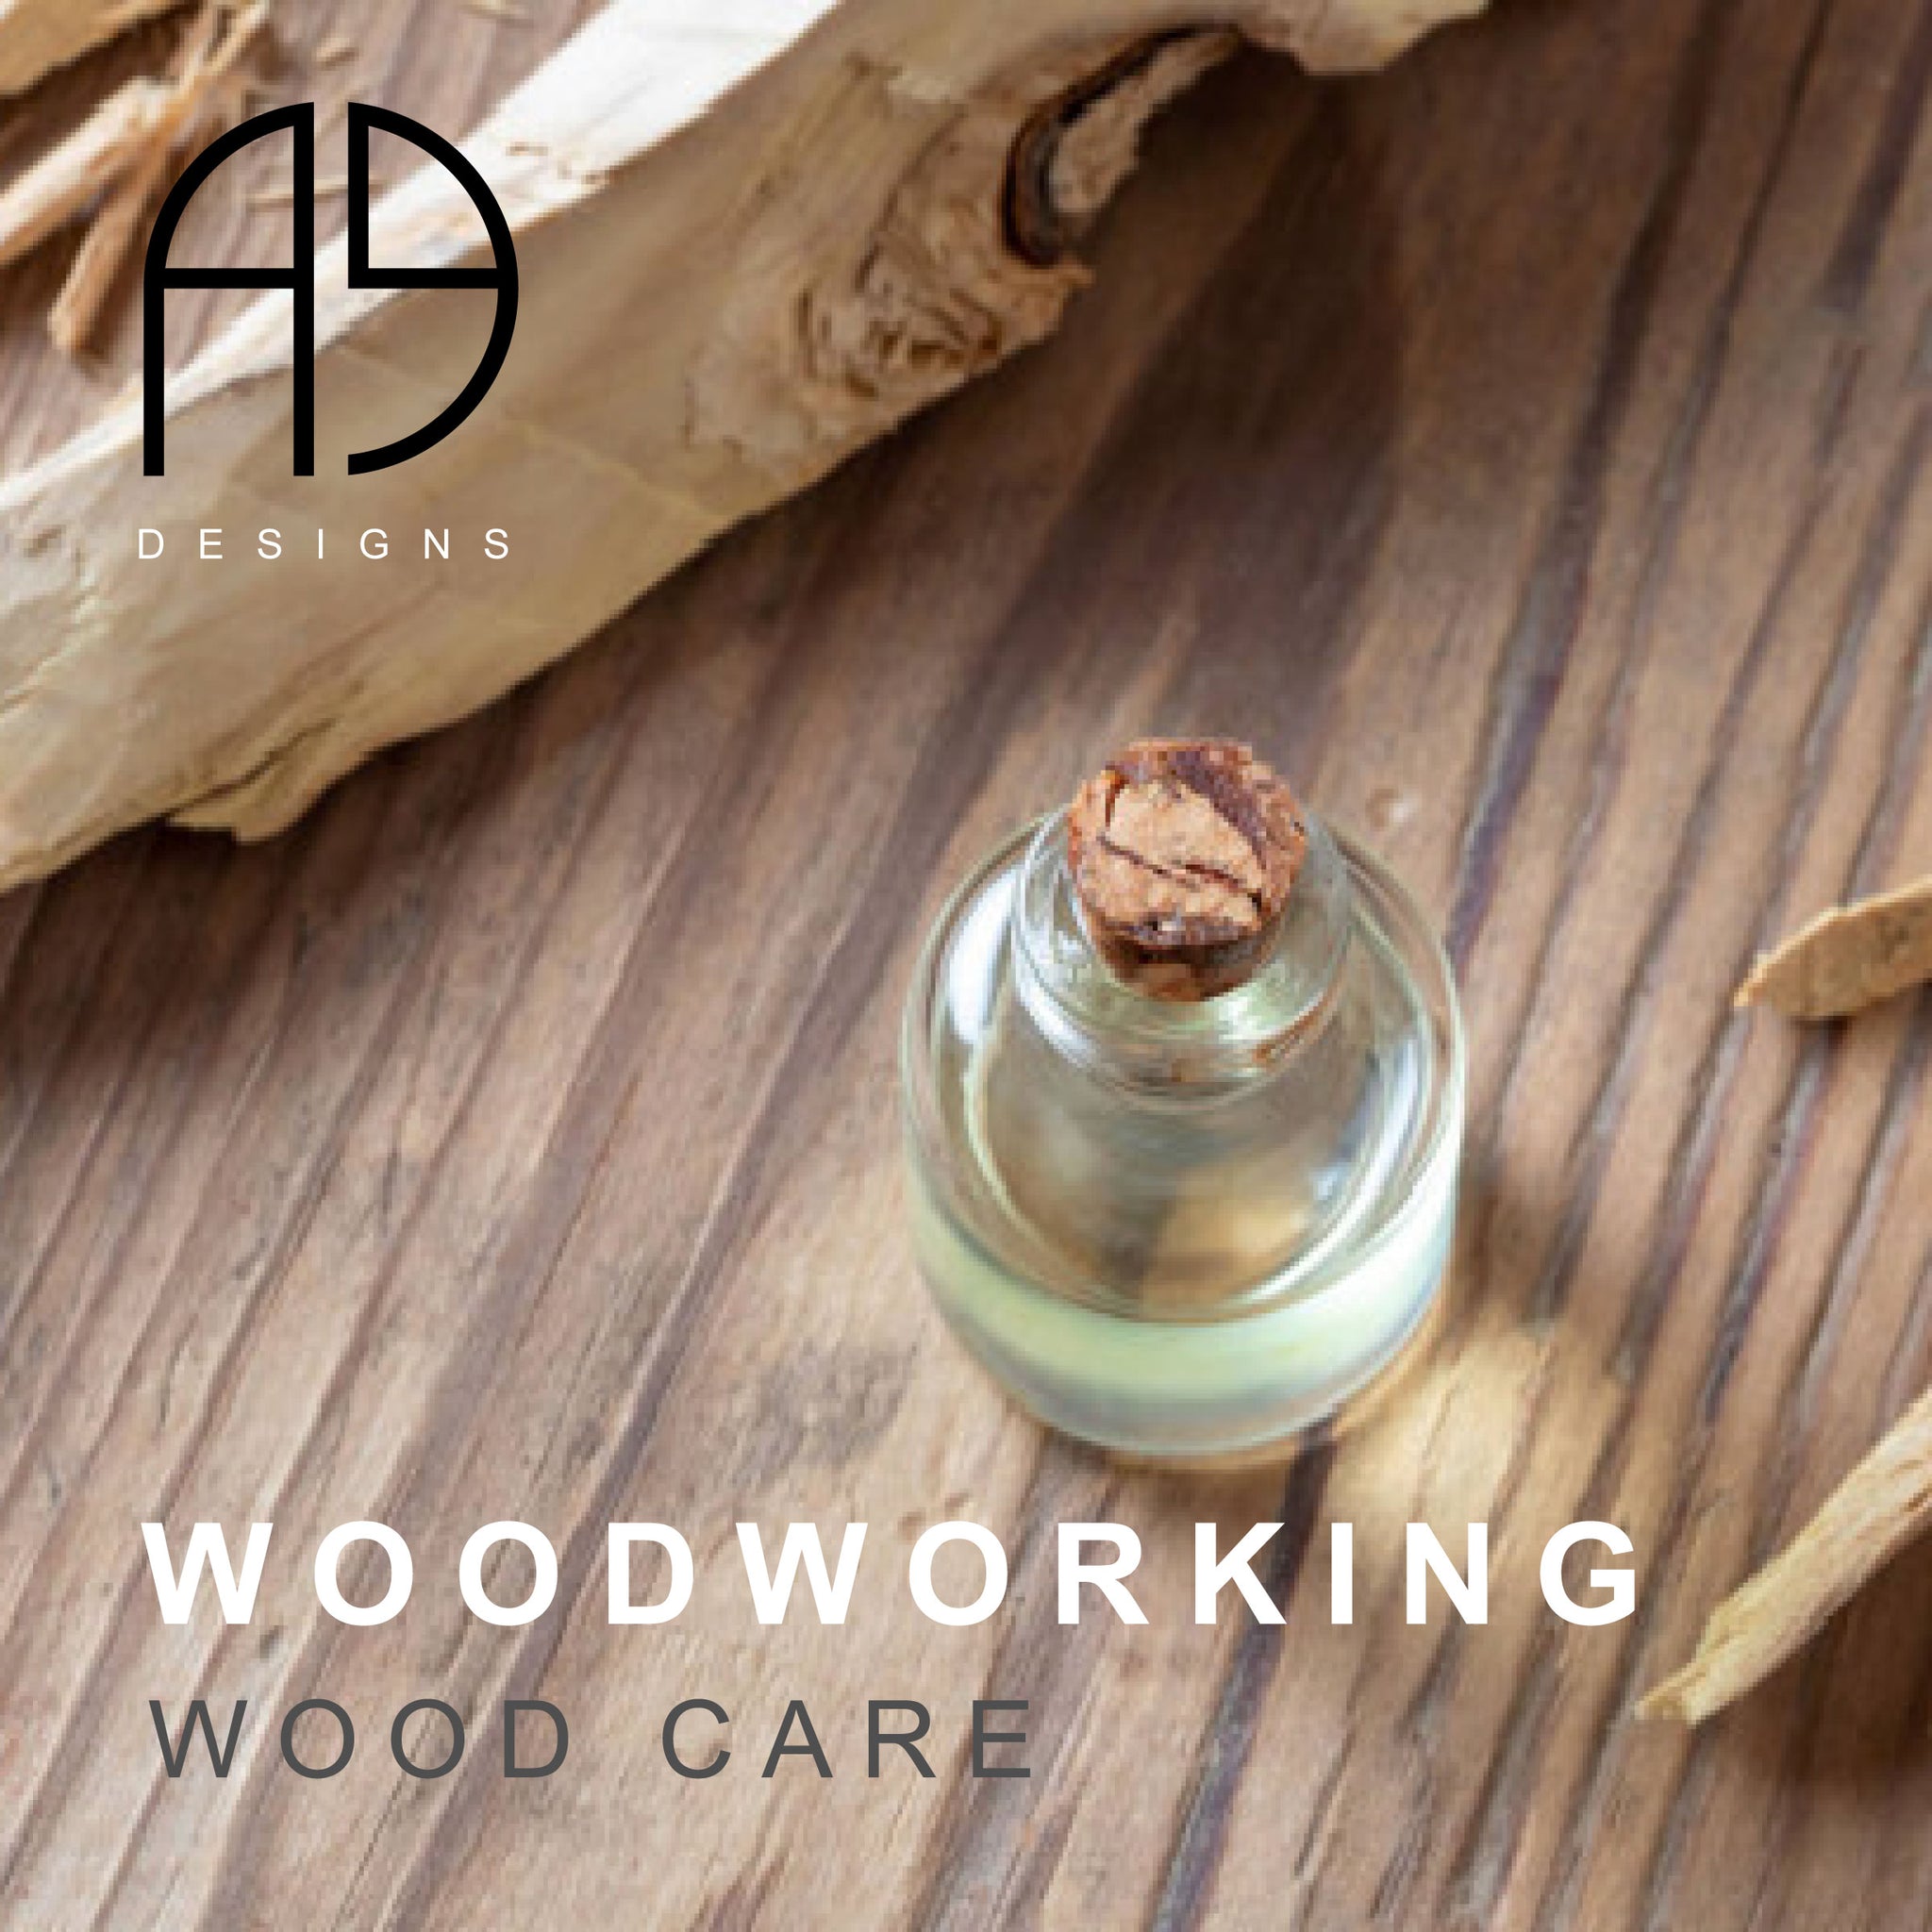 Taking Care of Your Wooden Products